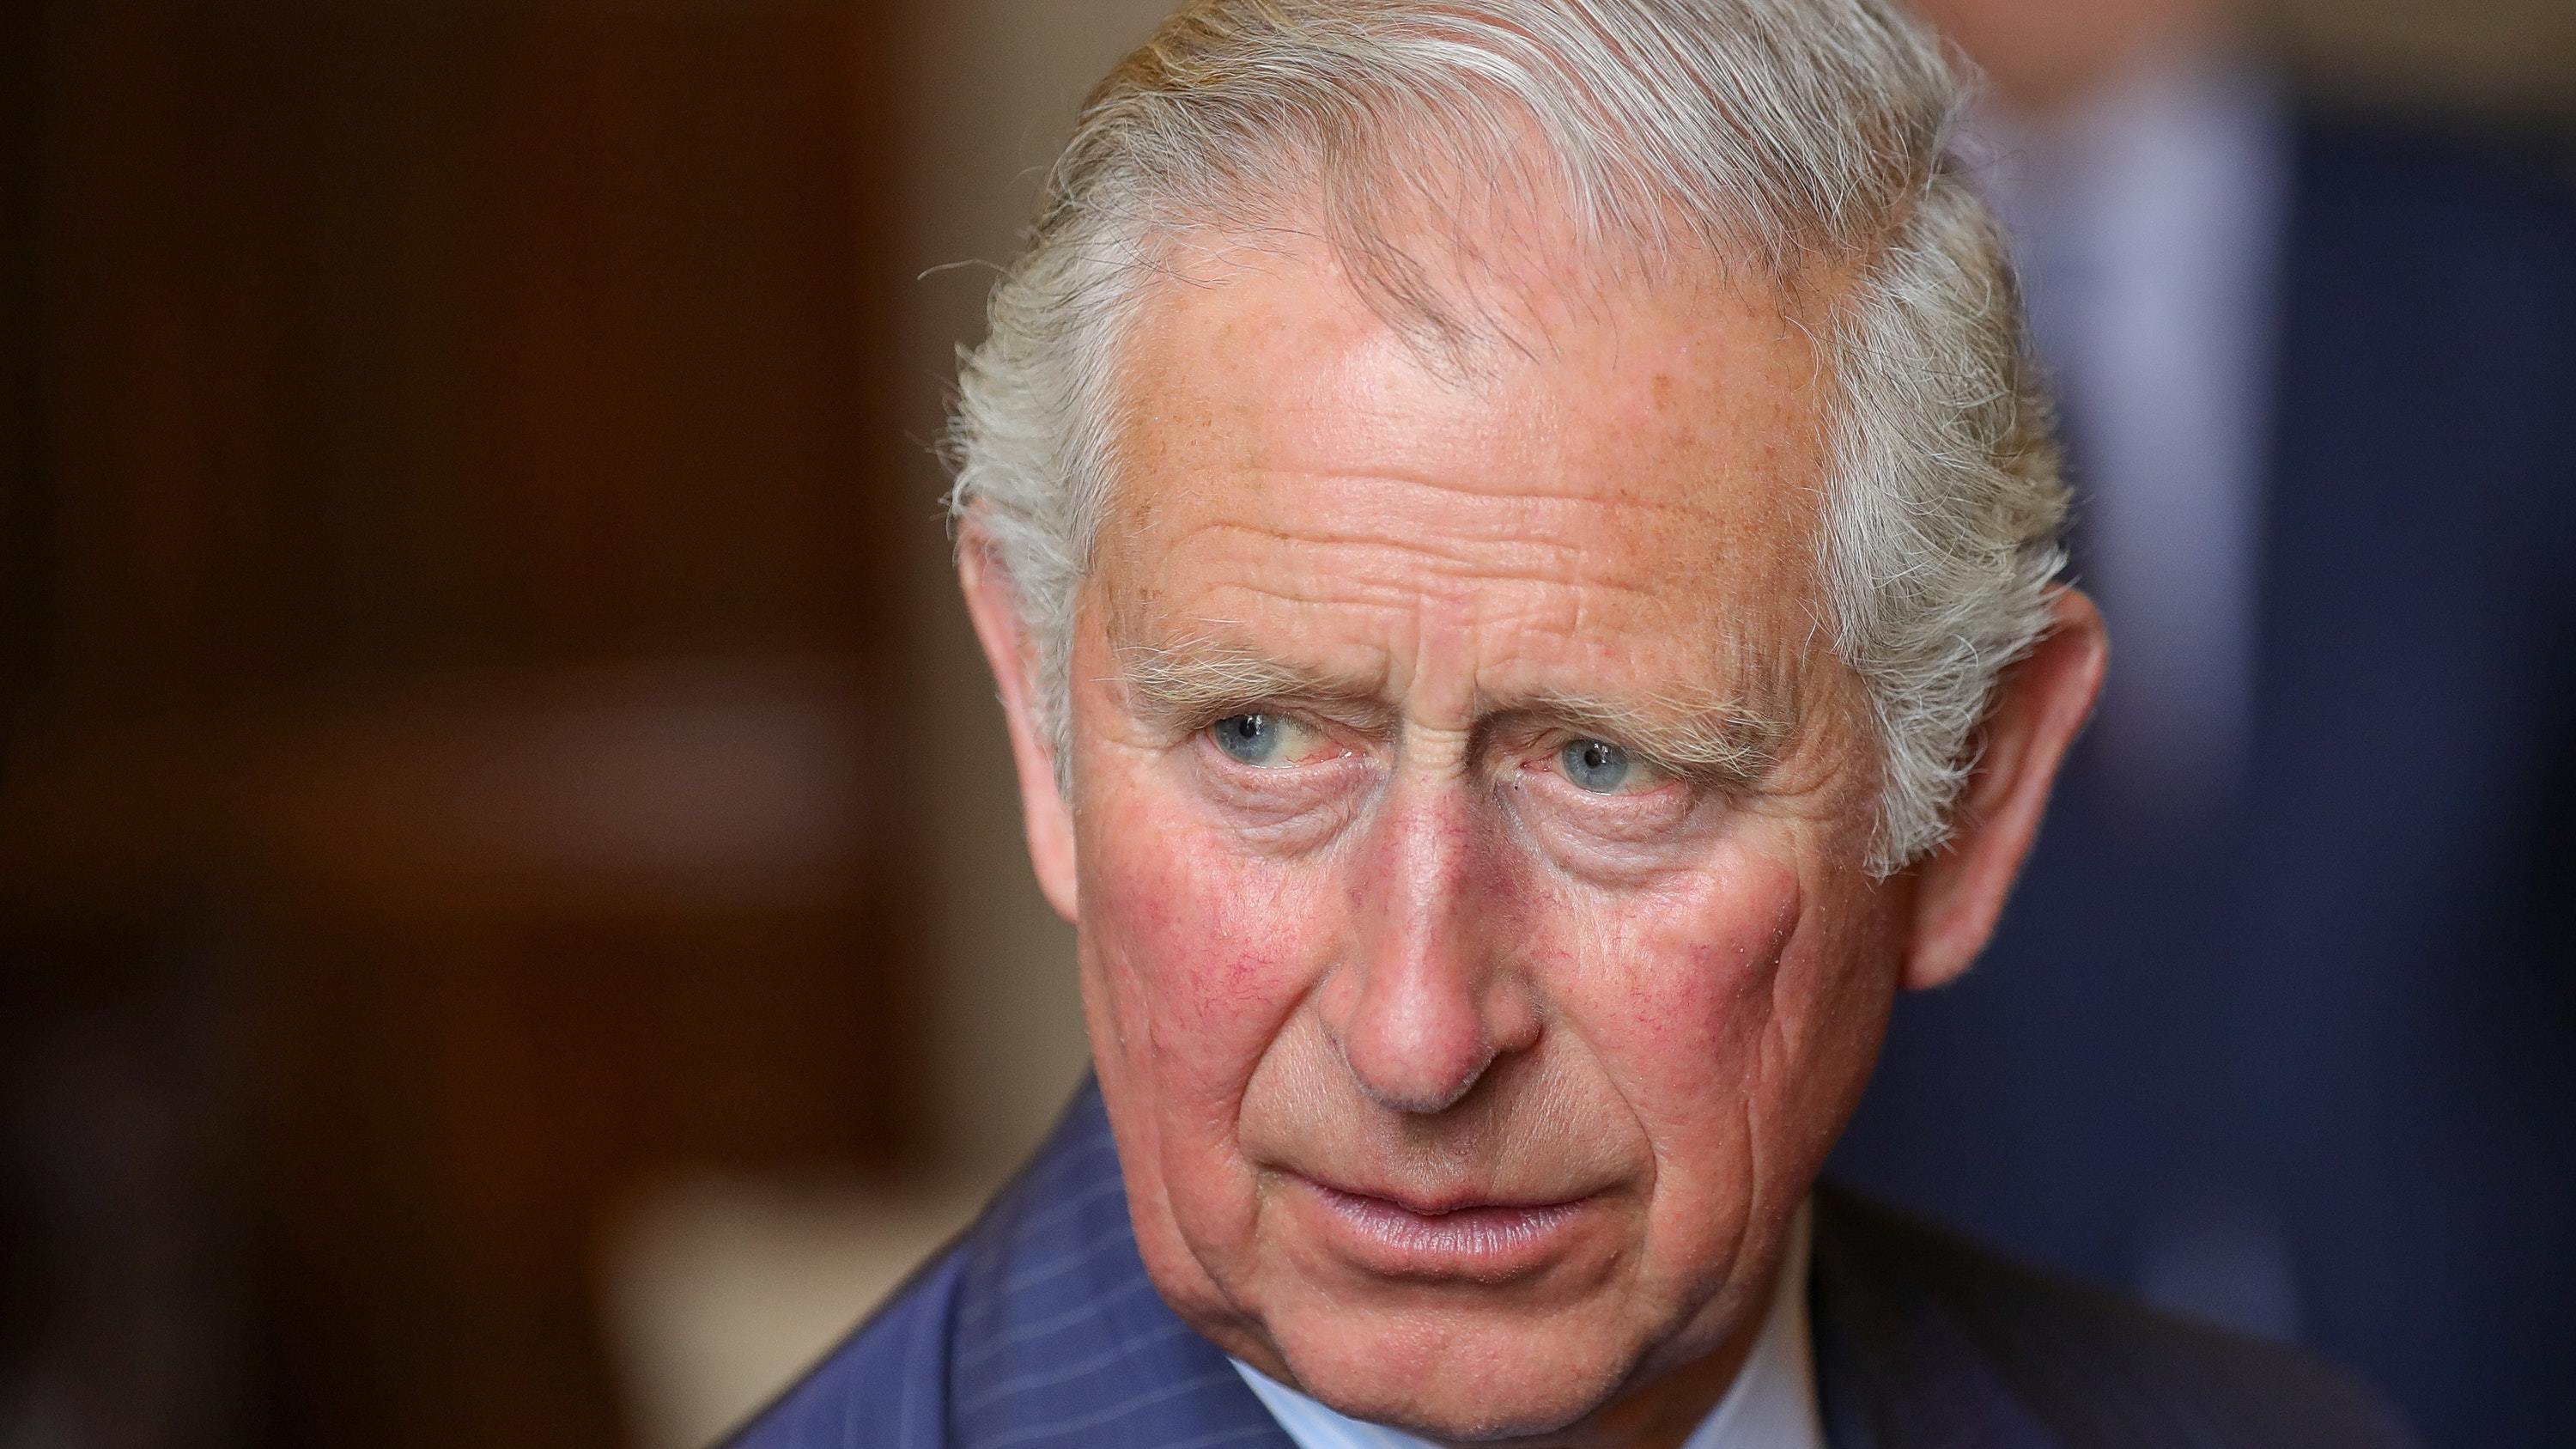 The most expensive trip per mile was Charles's journey from London Victoria to Cwmbran to carry out engagements in south Wales in February (Chris Furlong/PA)